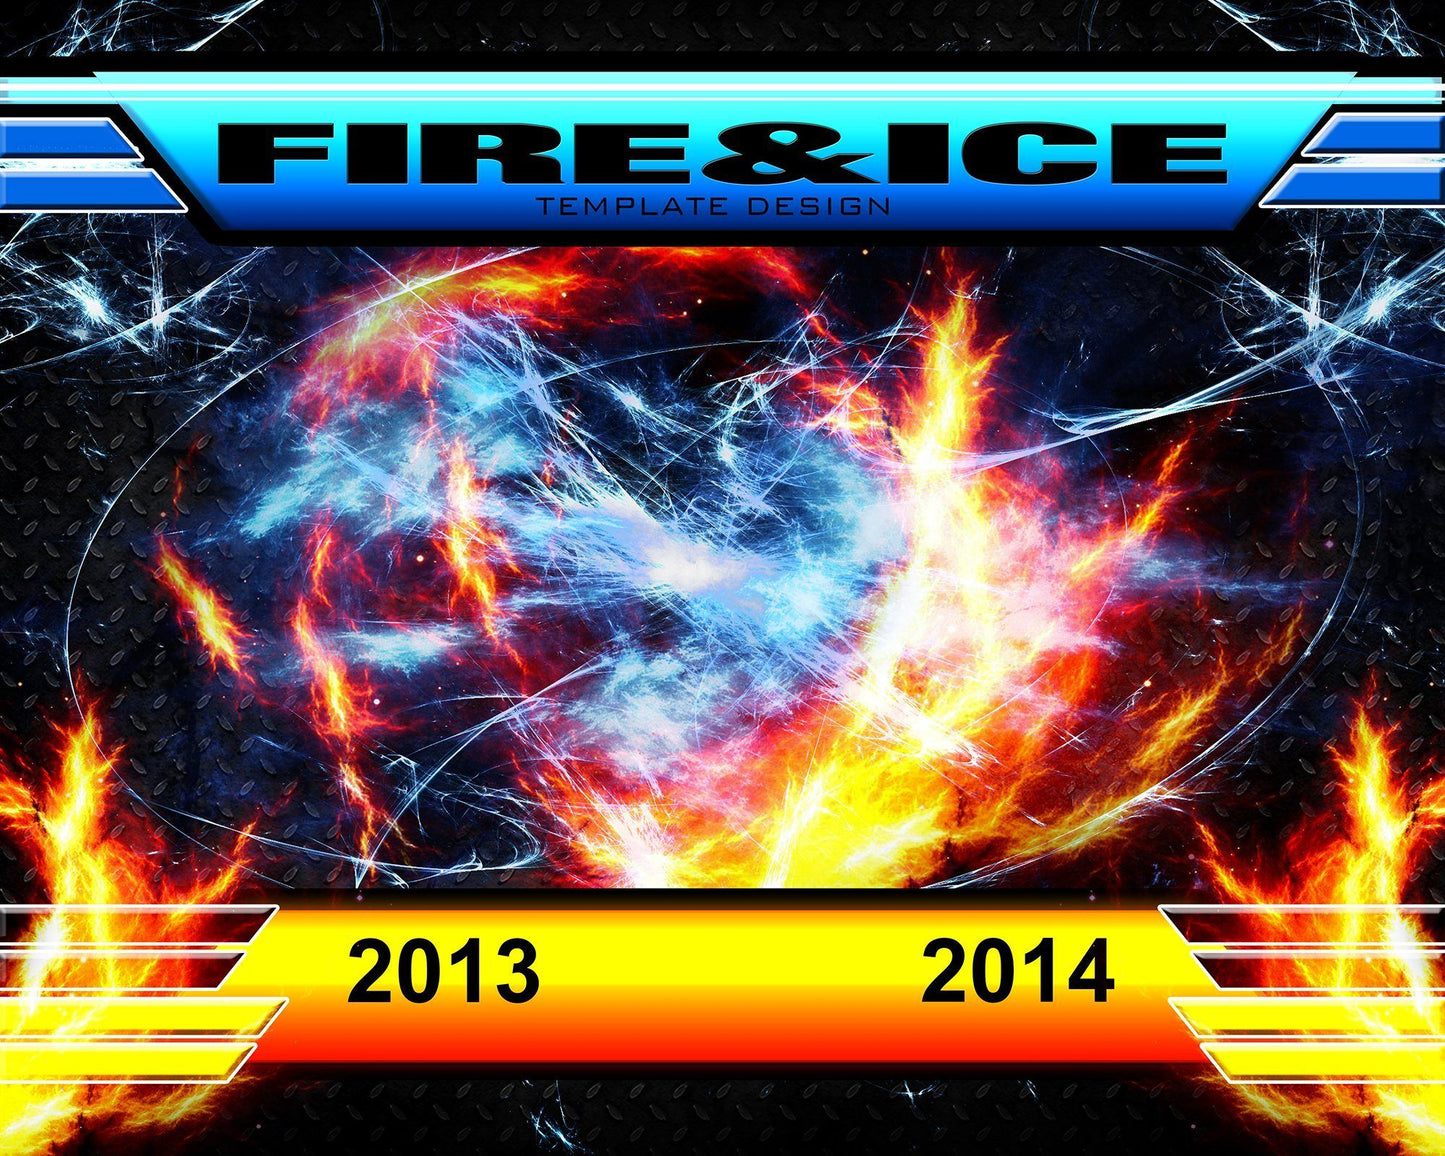 Fire & Ice v.3 - Xtreme Team-Photoshop Template - Photo Solutions